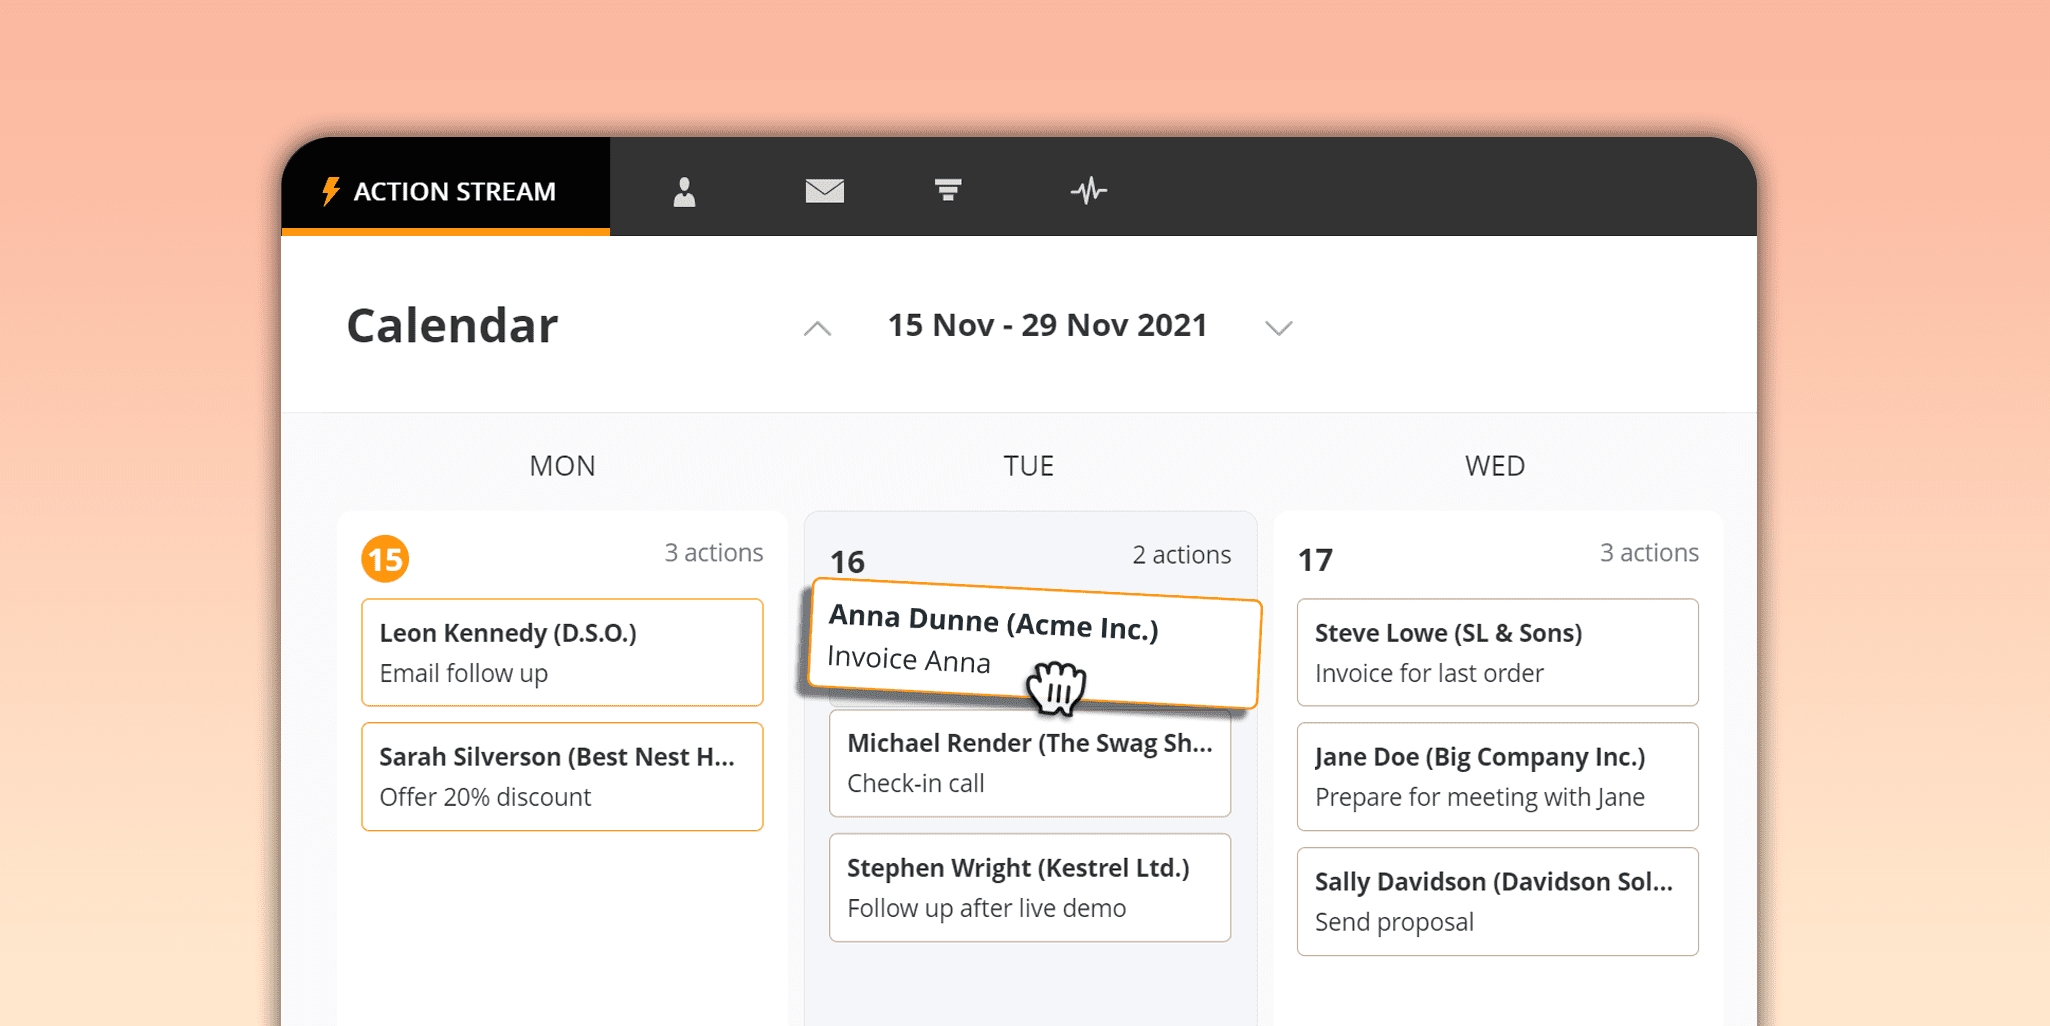 Review Your Next Actions in Calendar View